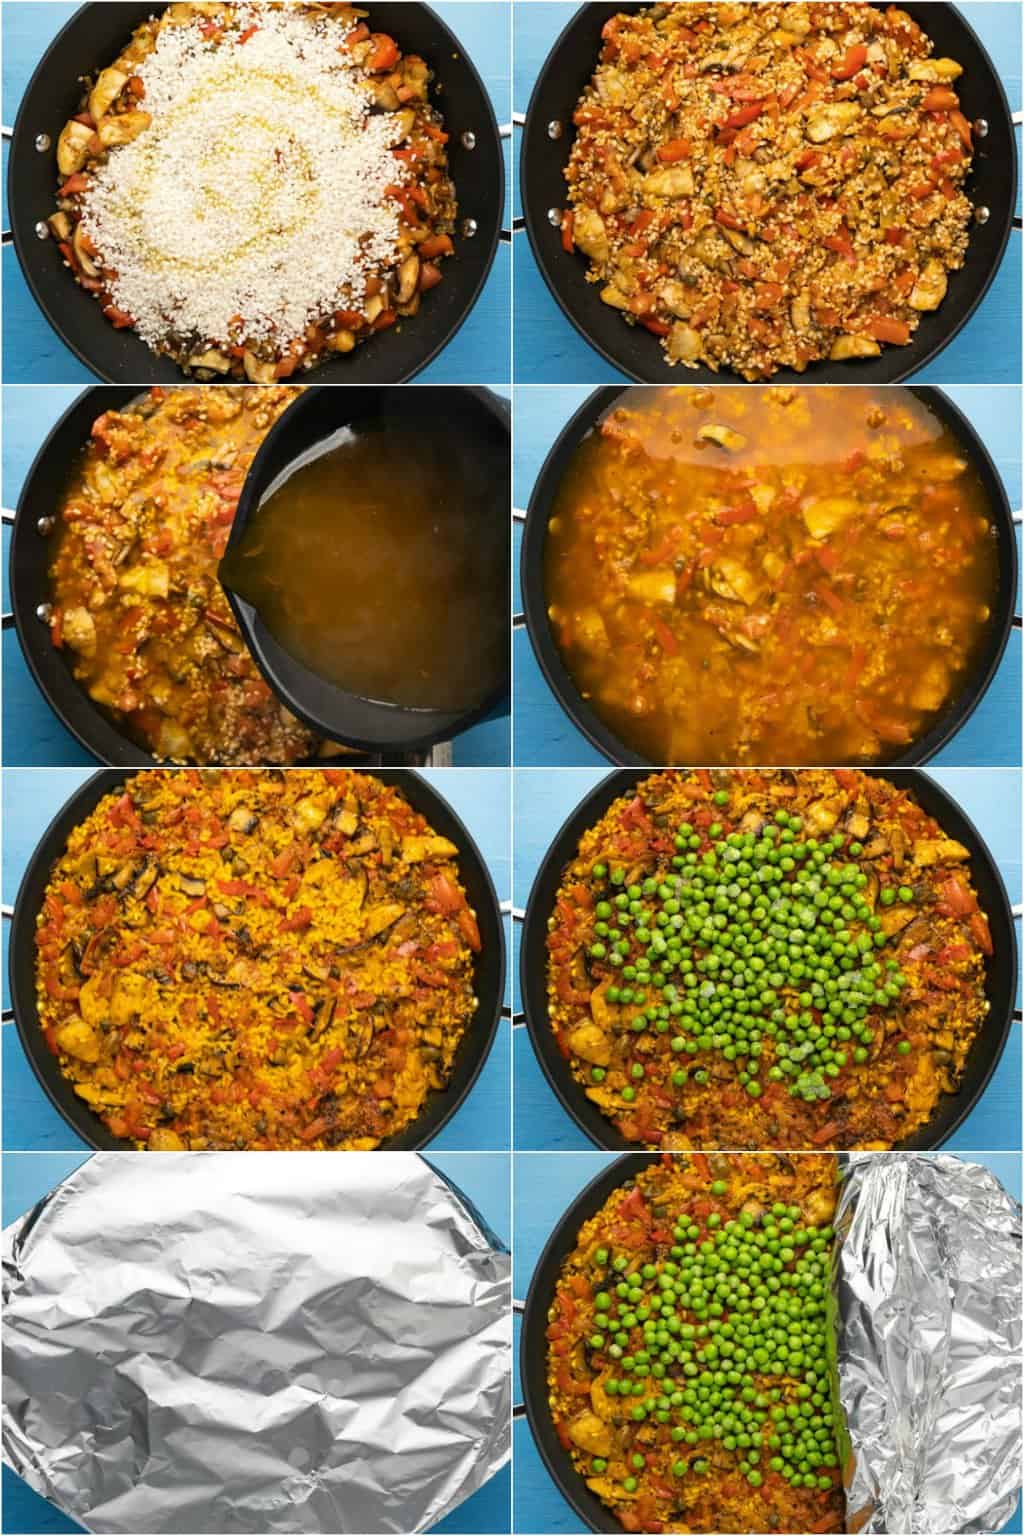 Step by step process photo collage of making vegan paella. 